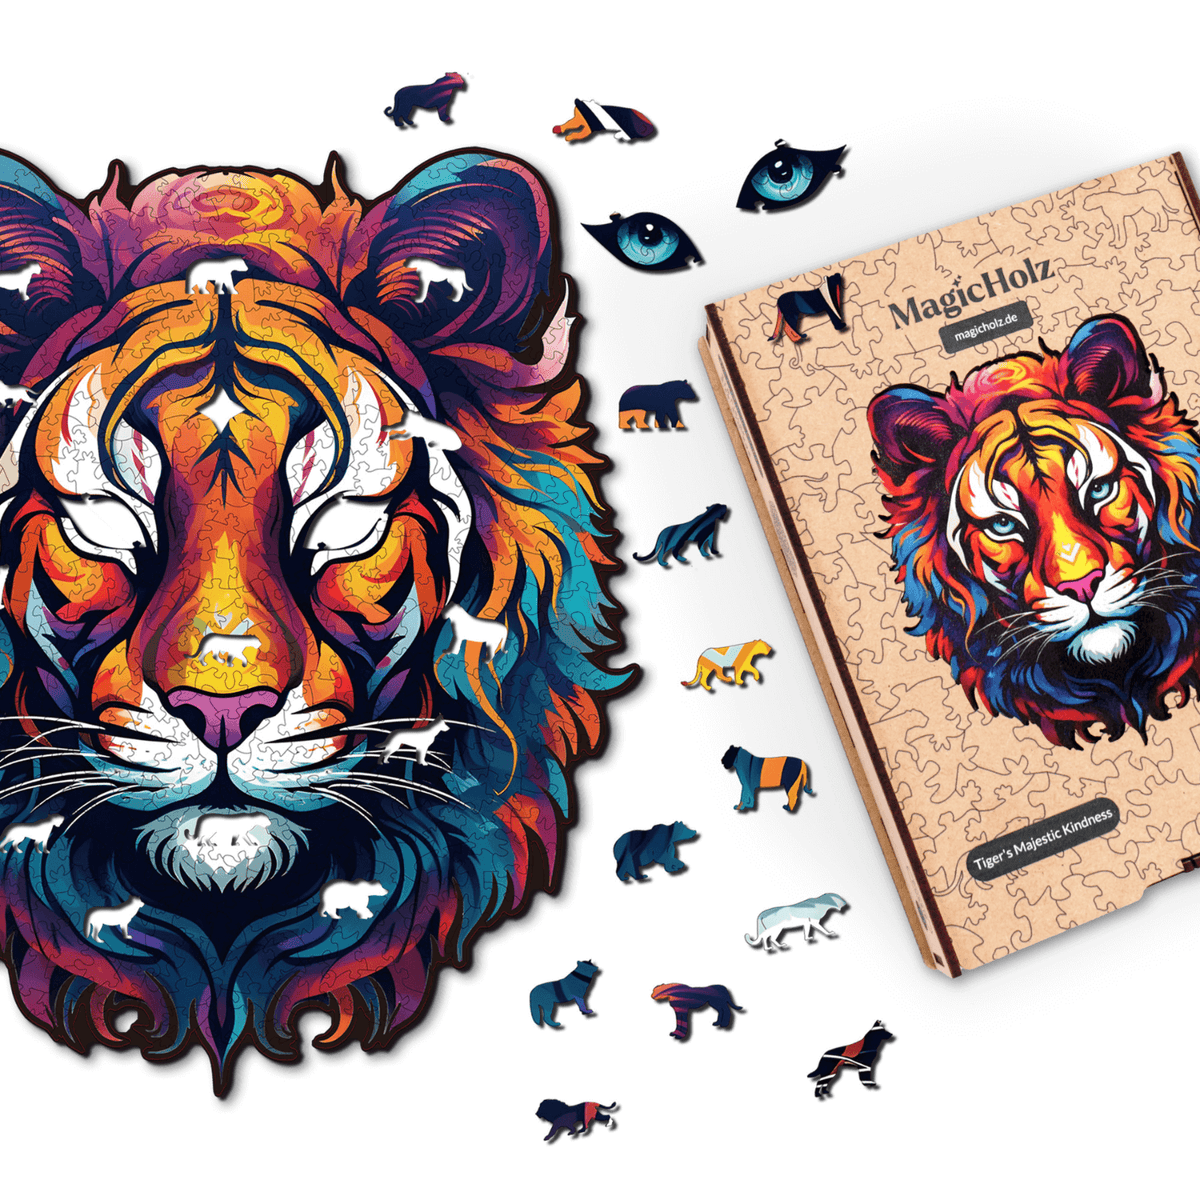 The majestic goodness | Tiger wooden puzzle-MagicHolz--